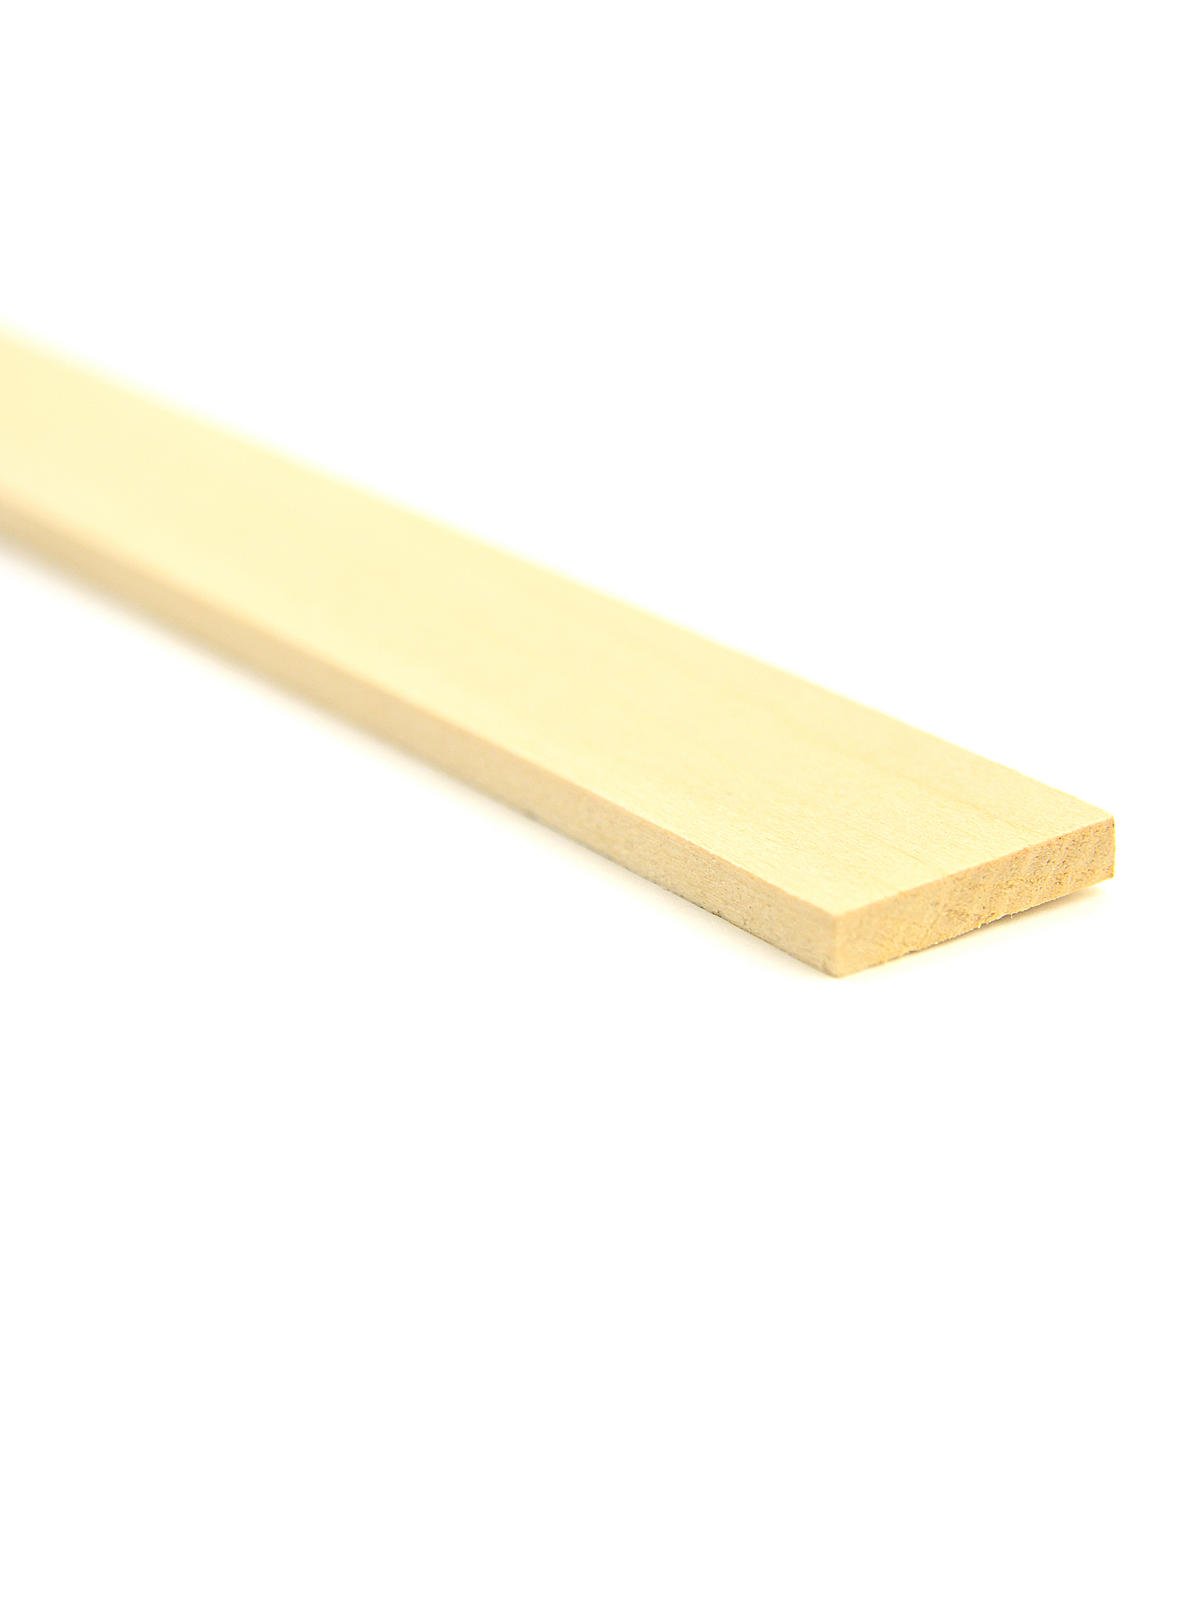 Midwest Products Genuine Basswood Sheet - 10 Sheets, 1/16 x 6 x 36